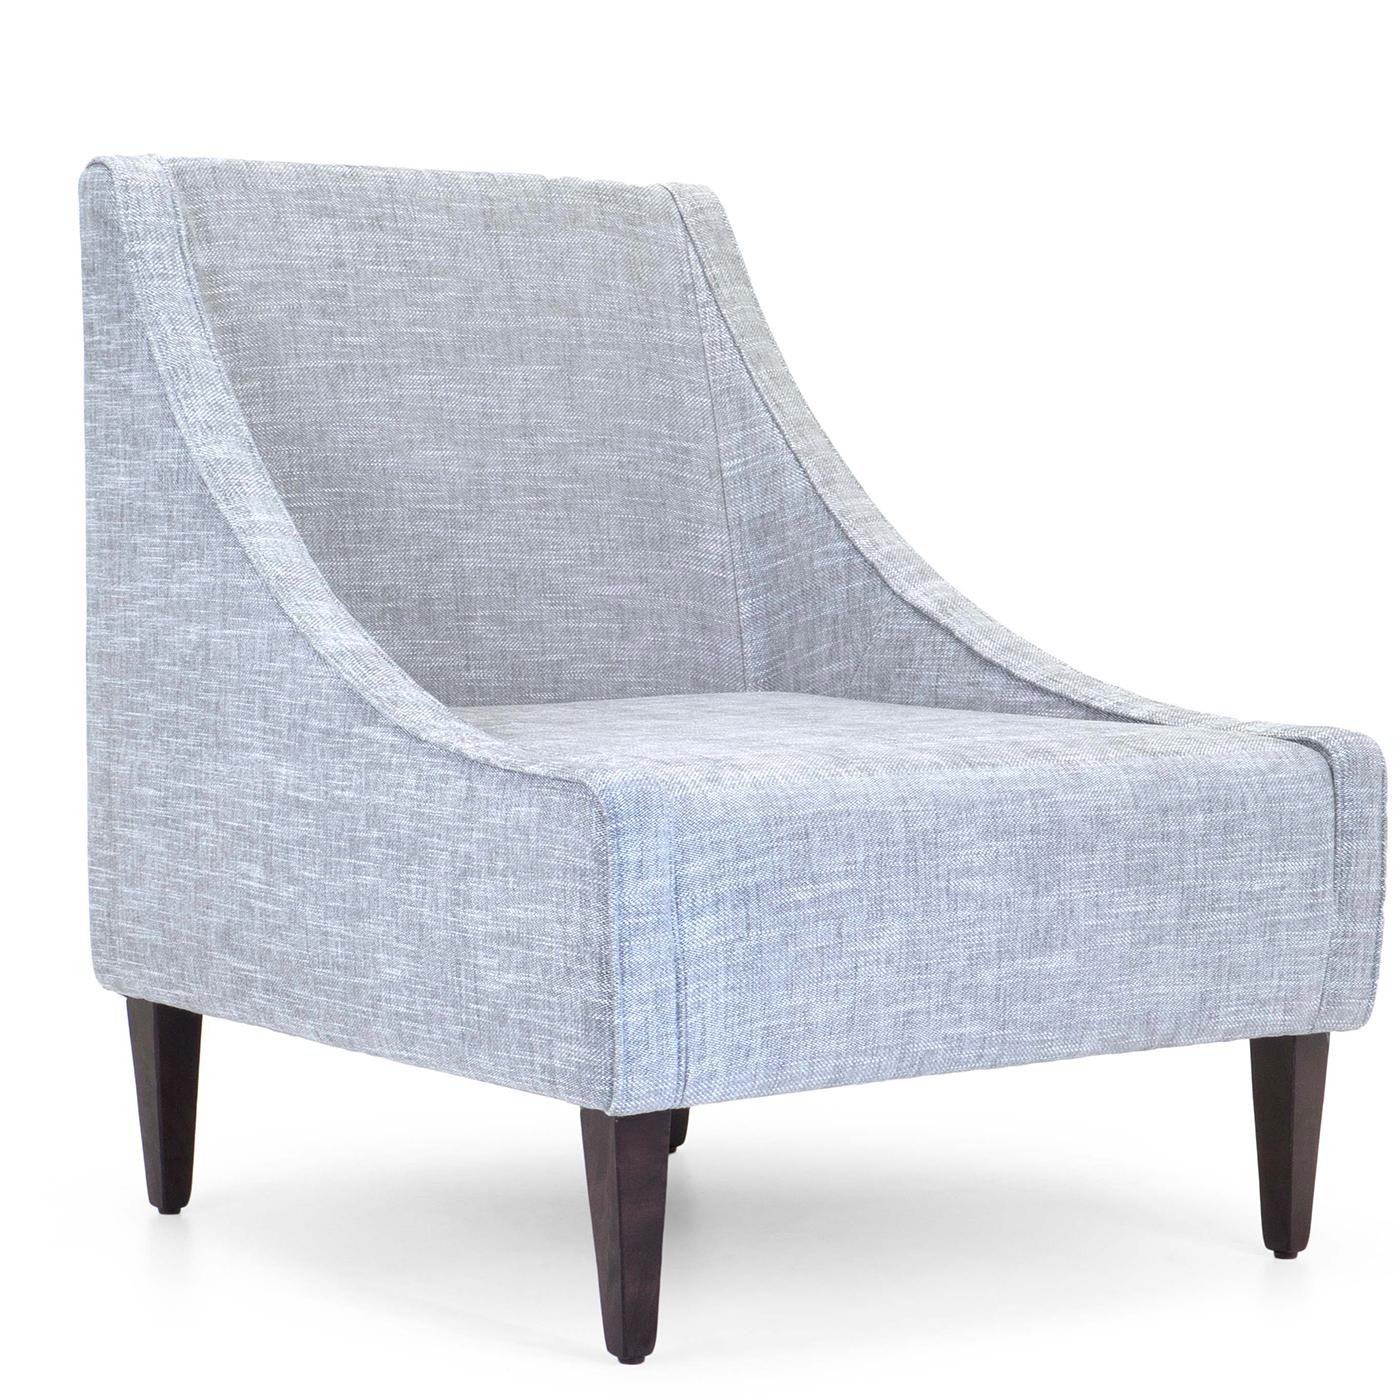 Modern with a retro twist, this splendid armchair is defined by a geometric allure with the elegant curve of the armrests, connecting backrest, and seat in an aesthetically appealing silhouette. Comfort is ensured by the multi-density polyurethane